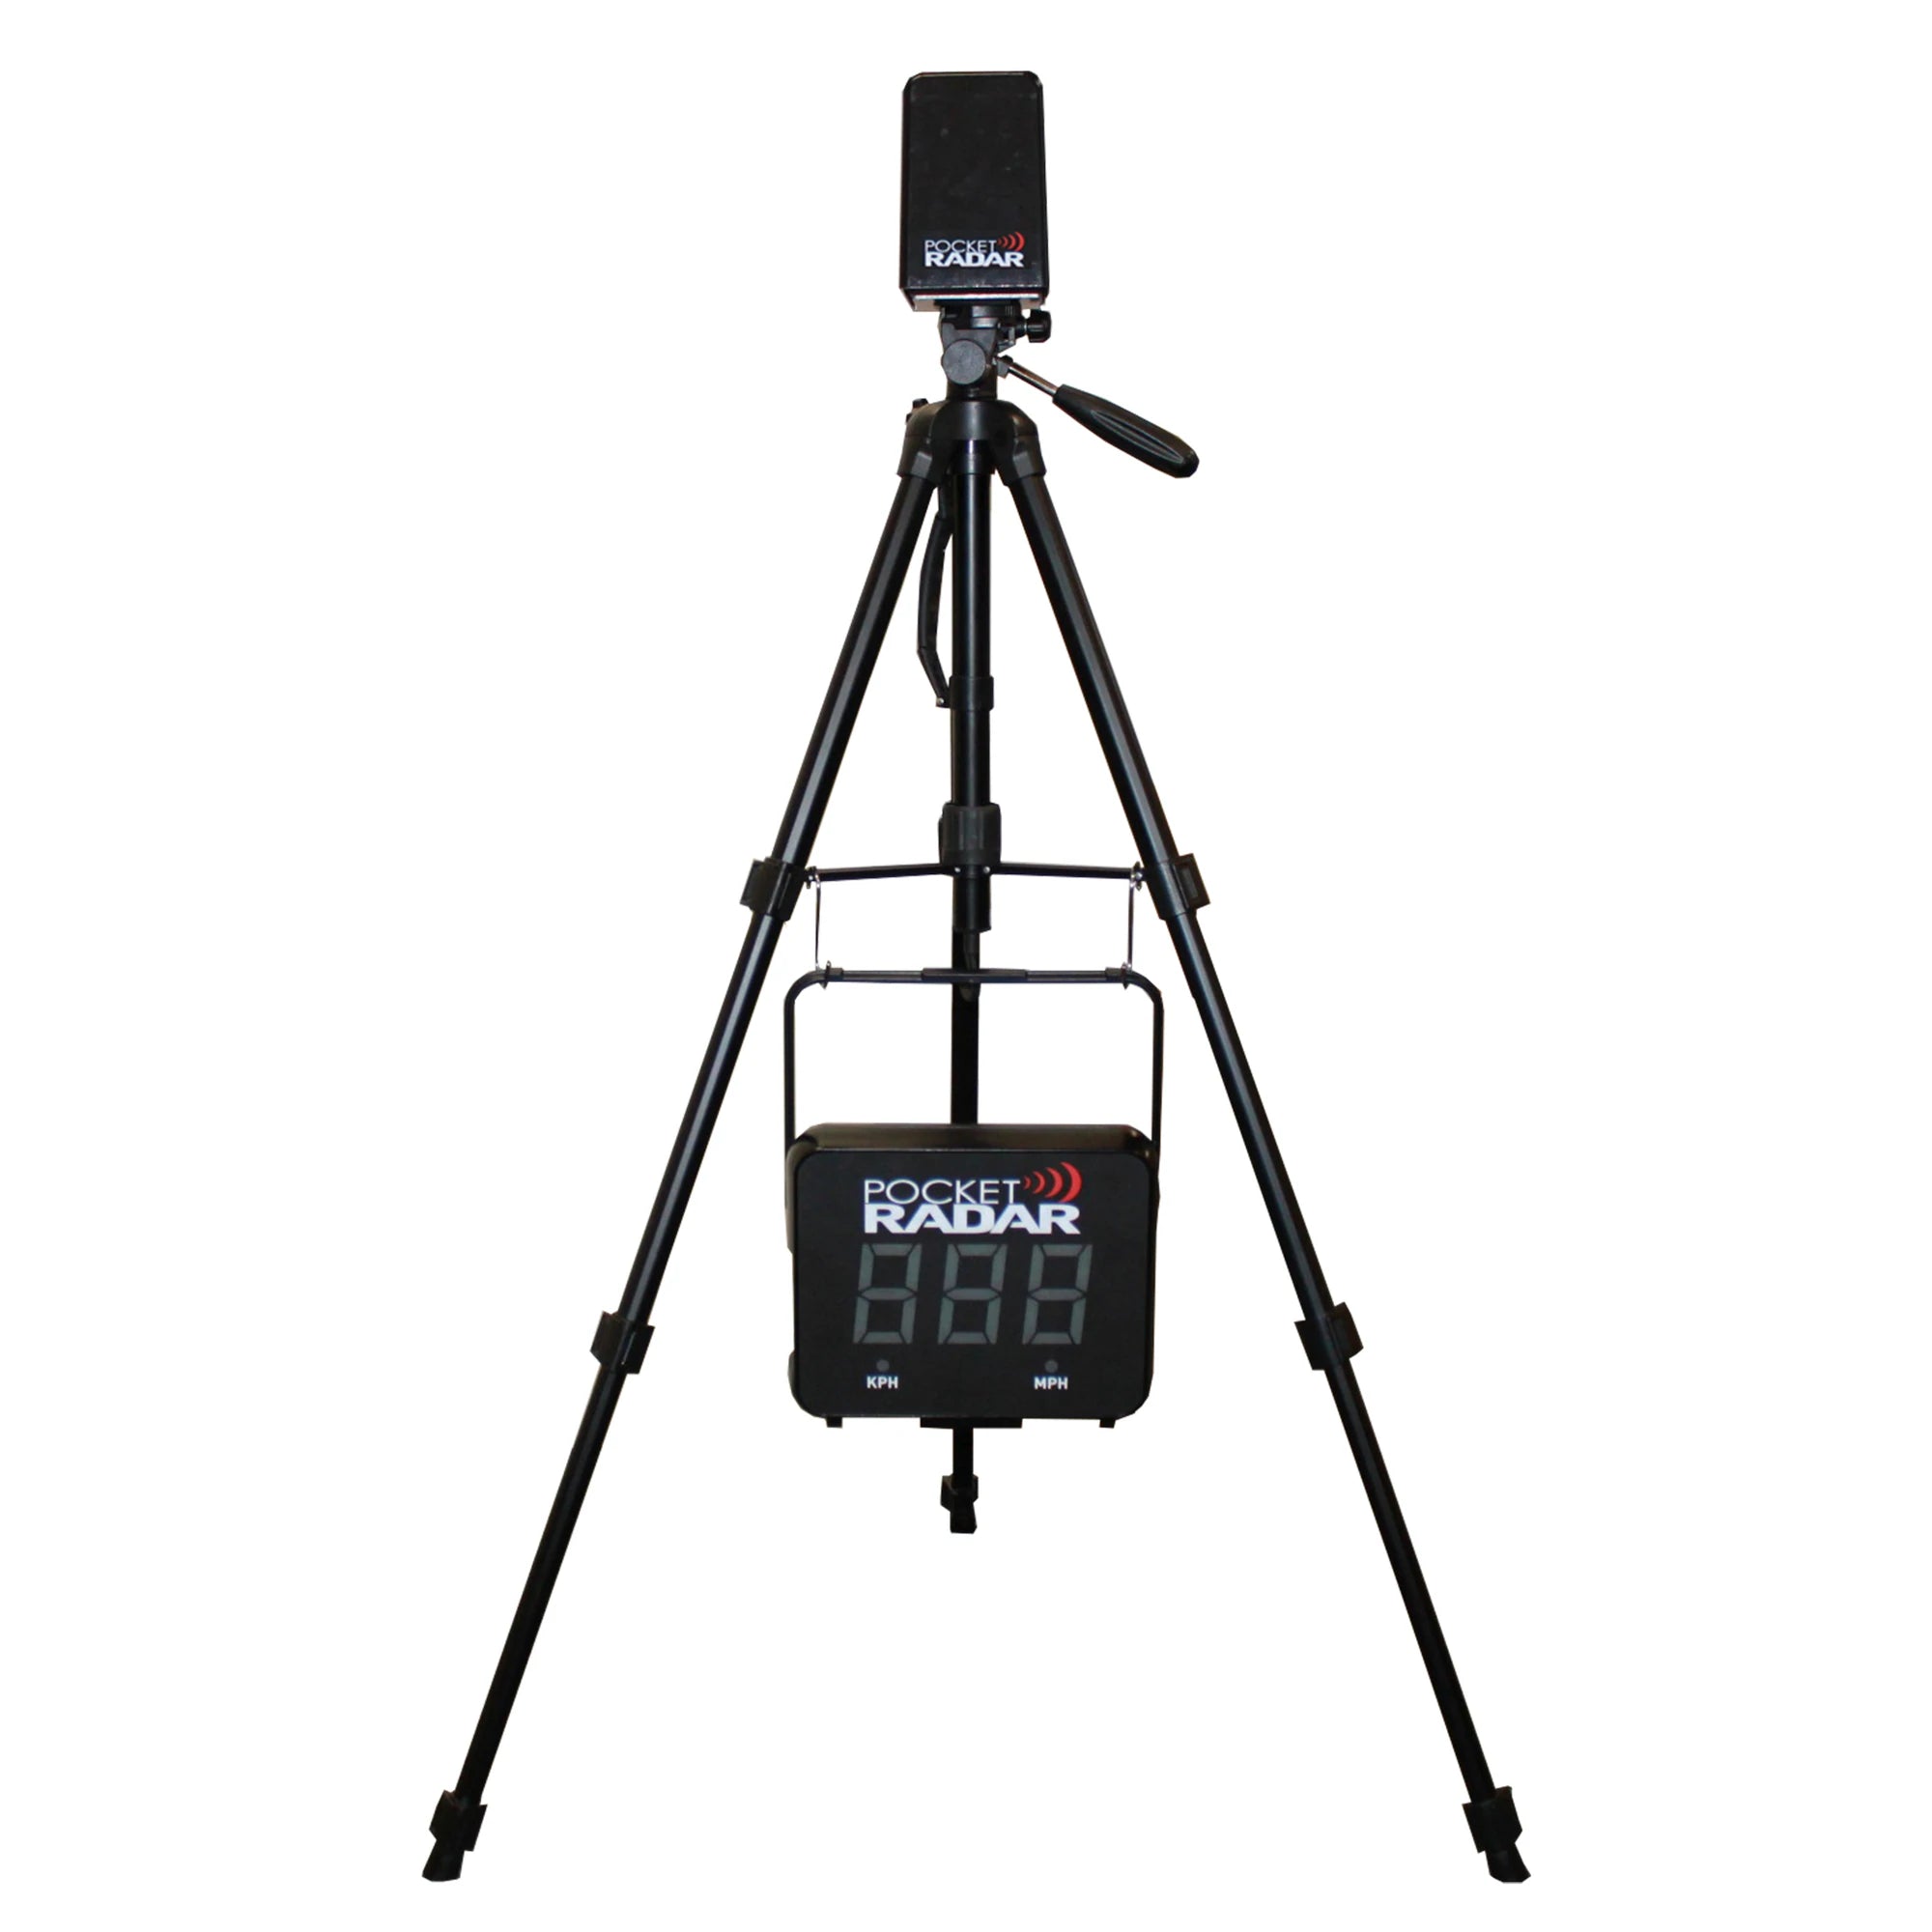 Deluxe Tripod with Screen and Pocket Radar